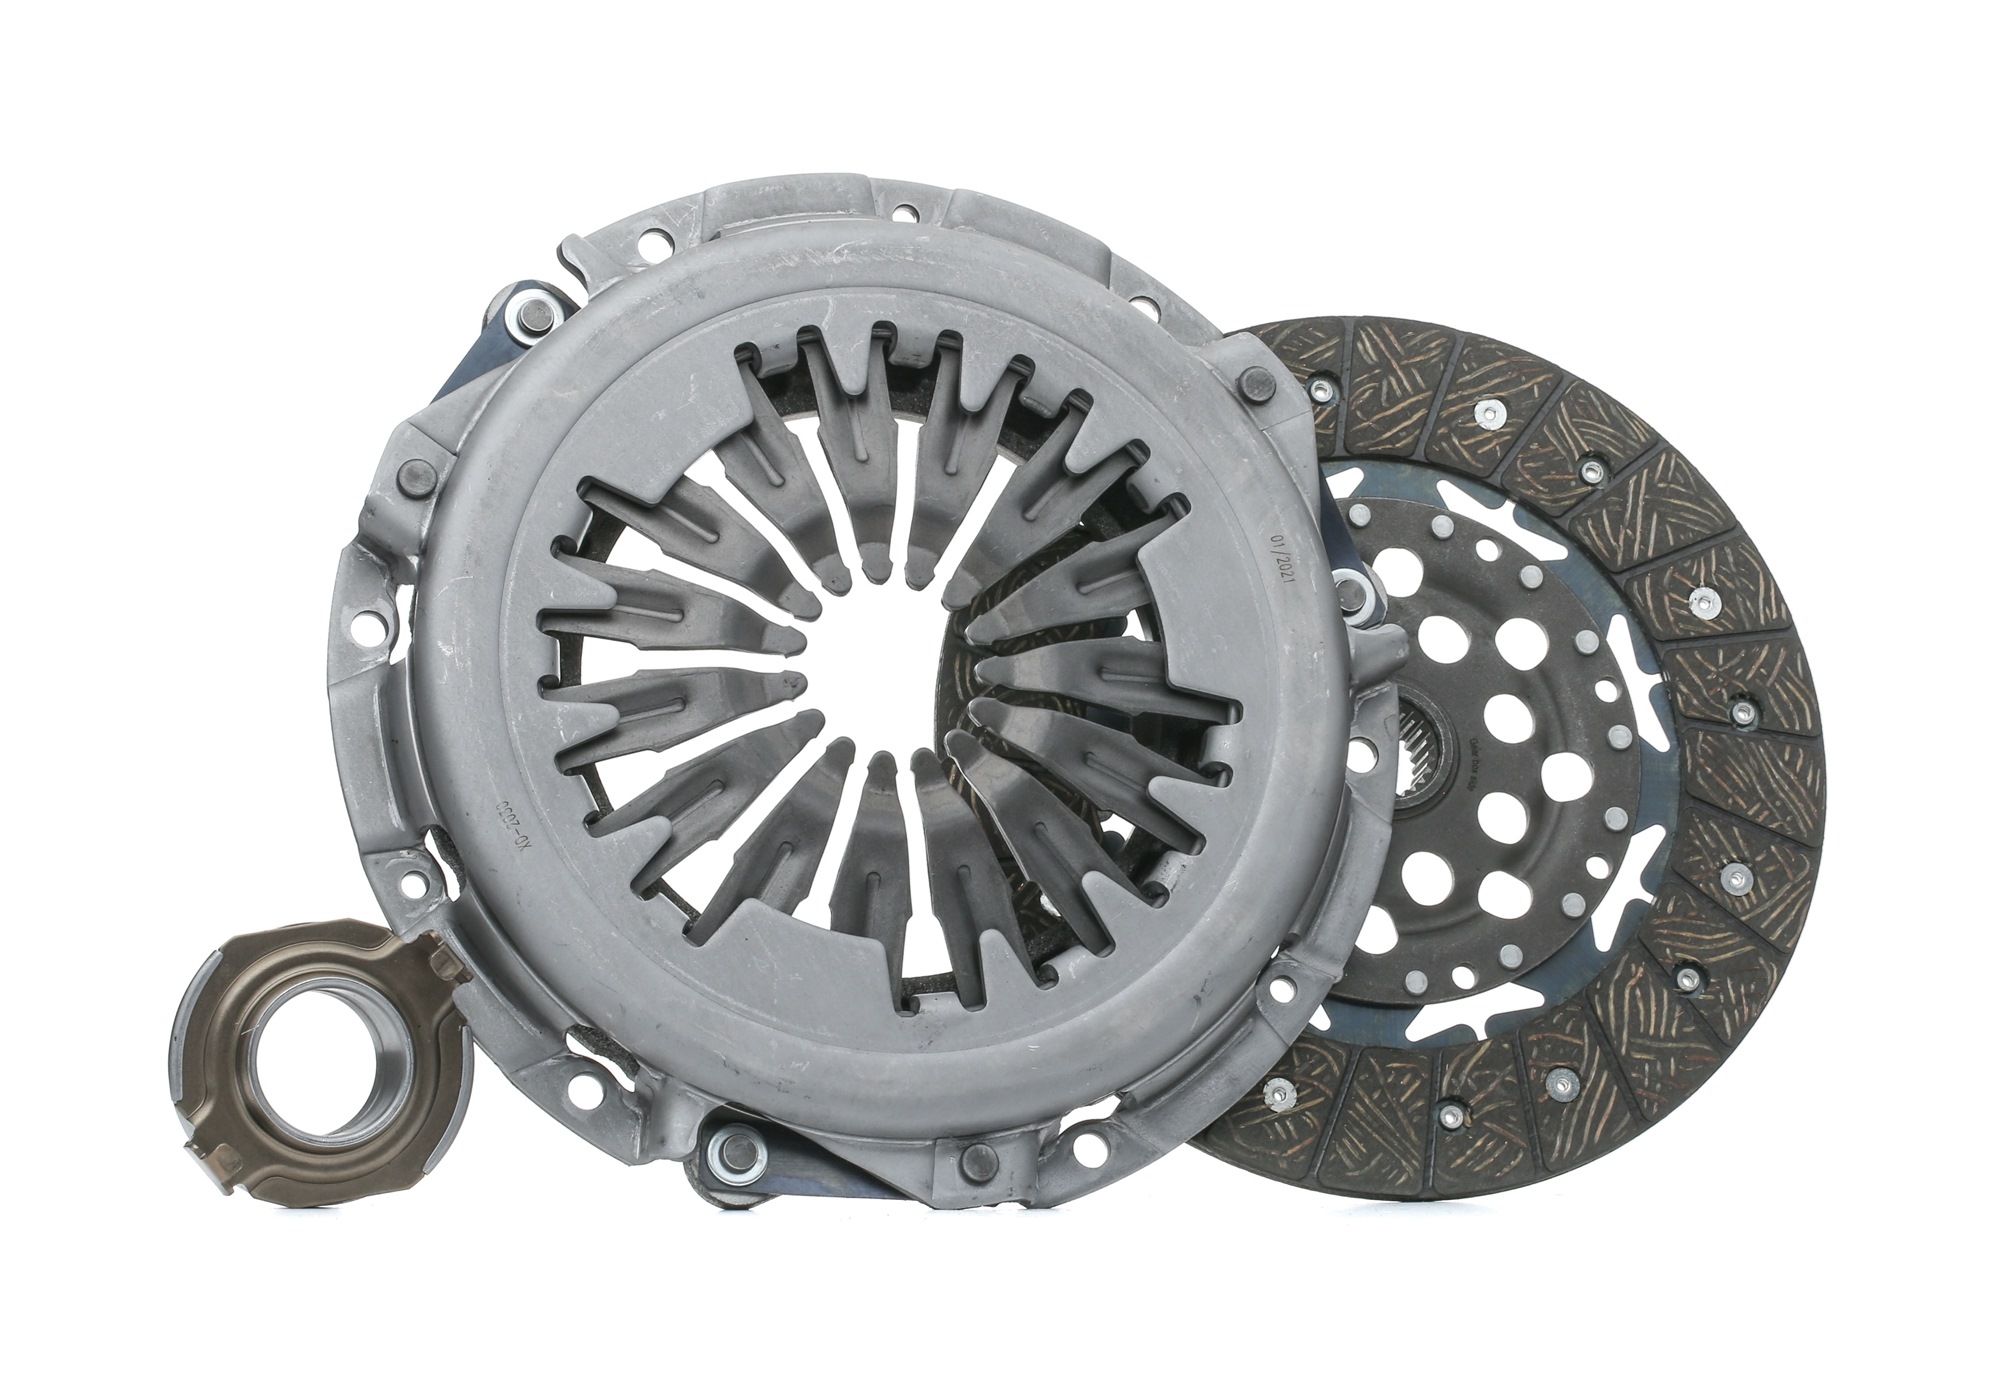 STATIM 100.956 Clutch kit for engines with dual-mass flywheel, with release plate, with clutch disc, with bearing(s), 240mm